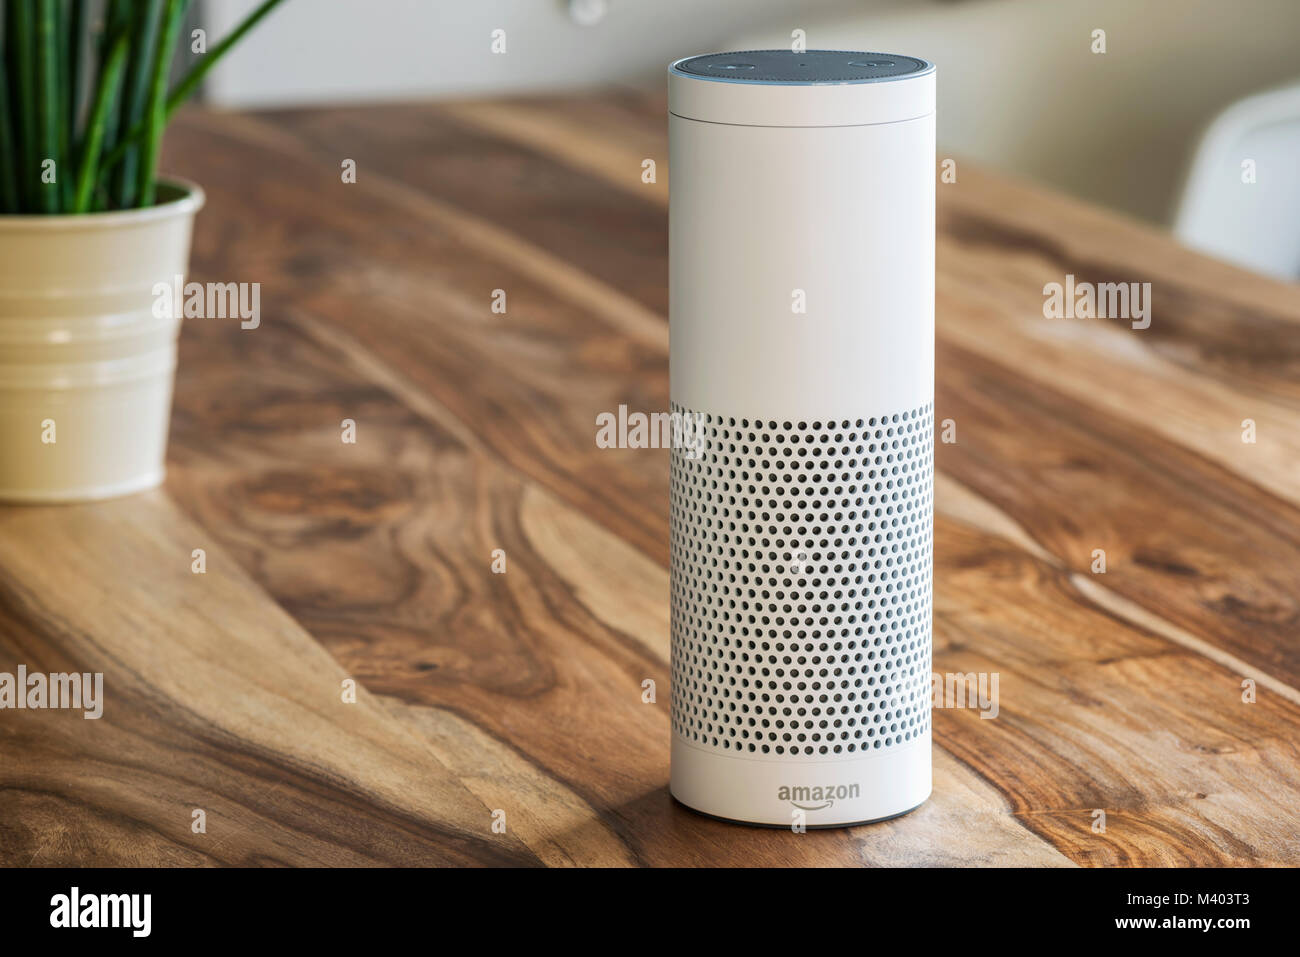 MUENSTER - JANUARY 27, 2018: White Amazon Echo Plus, Alexa Voice Service activated recognition system photographed on wooden table in living room Stock Photo